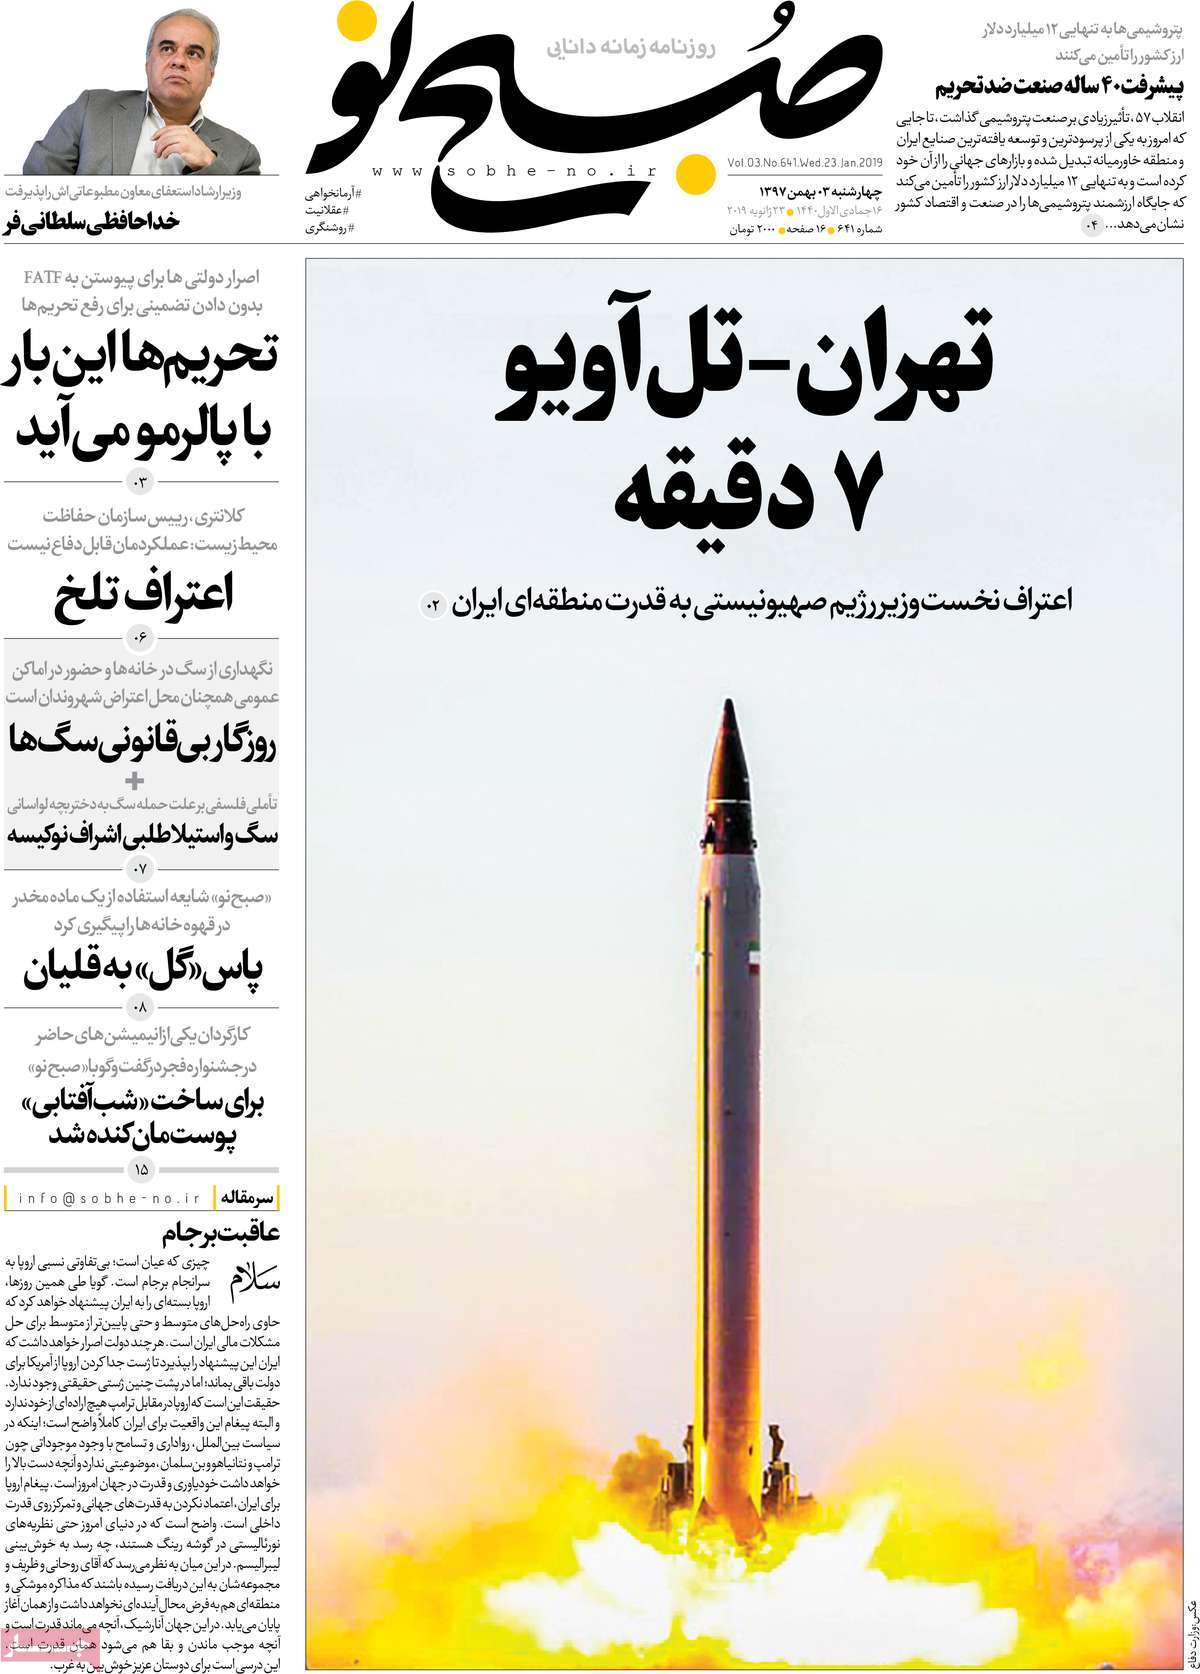 A Look at Iranian Newspaper Front Pages on January 23